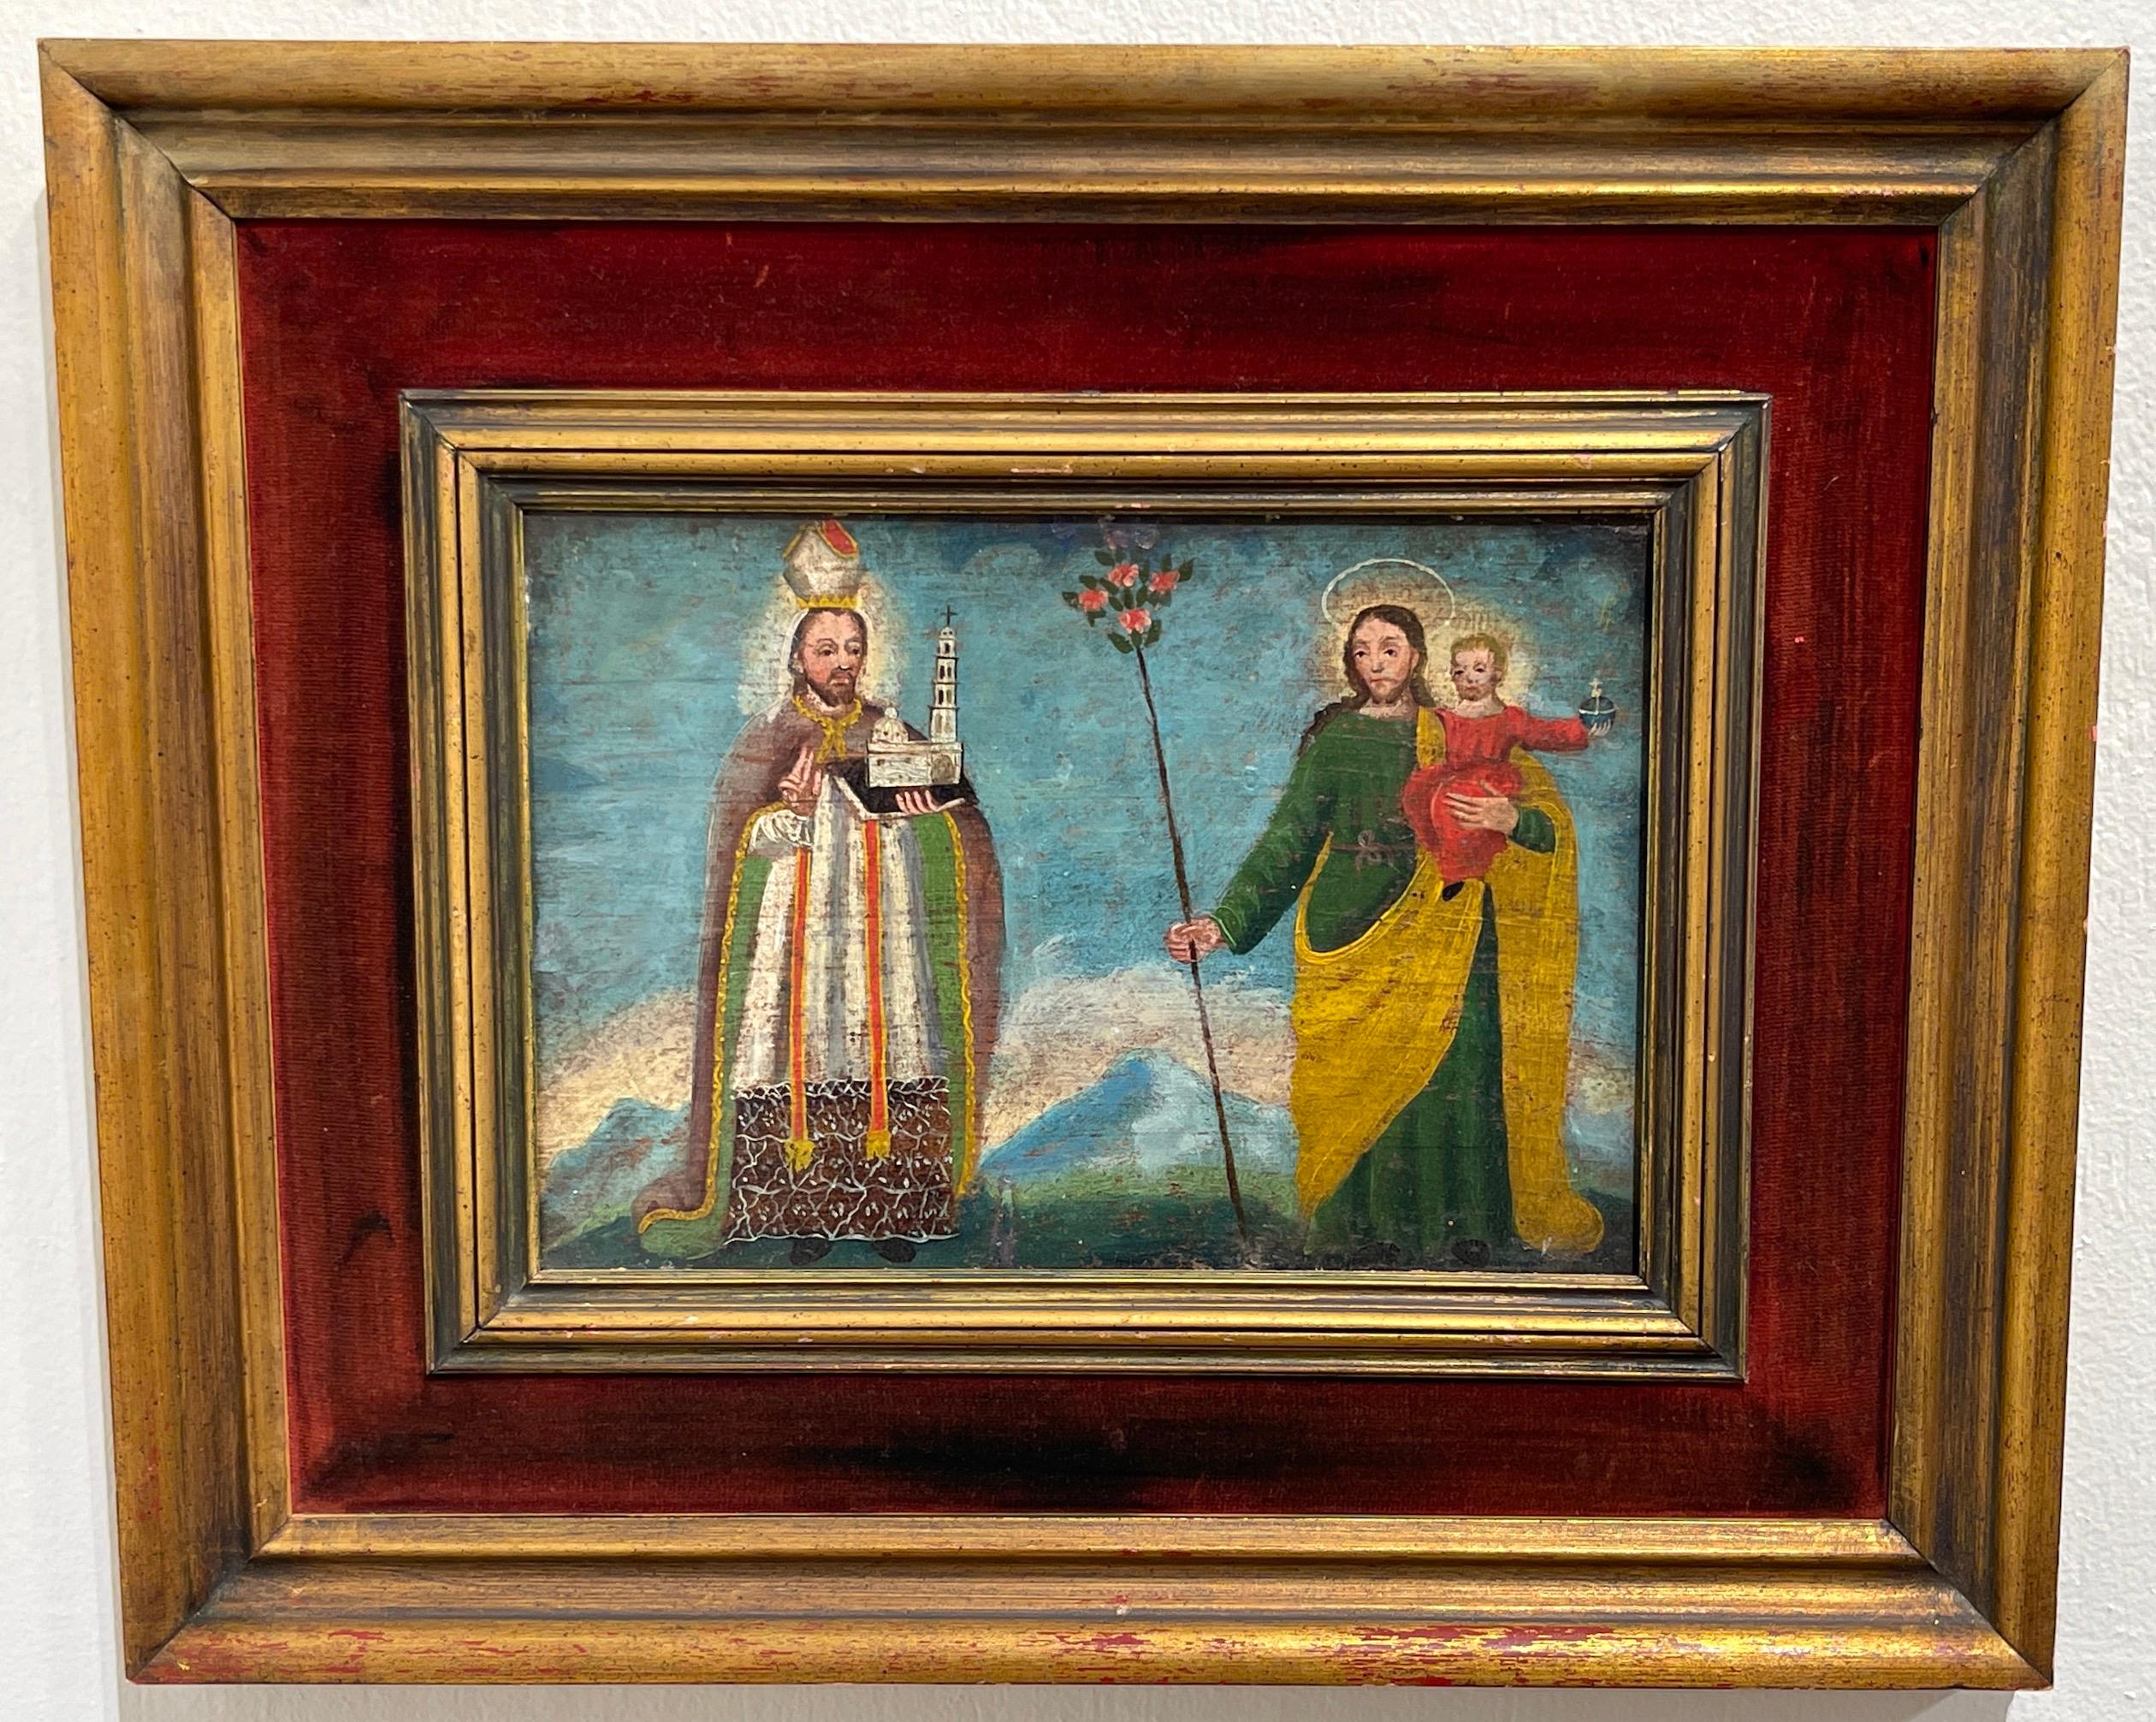 19th Century Spanish colonial Icon /Retablo saint & christ & child landscape.
Painted on Board, in a later giltwood & inset velvet frame.

An atypical depiction of a standing saint holding an architectural model of a 
la iglesia to the left, the